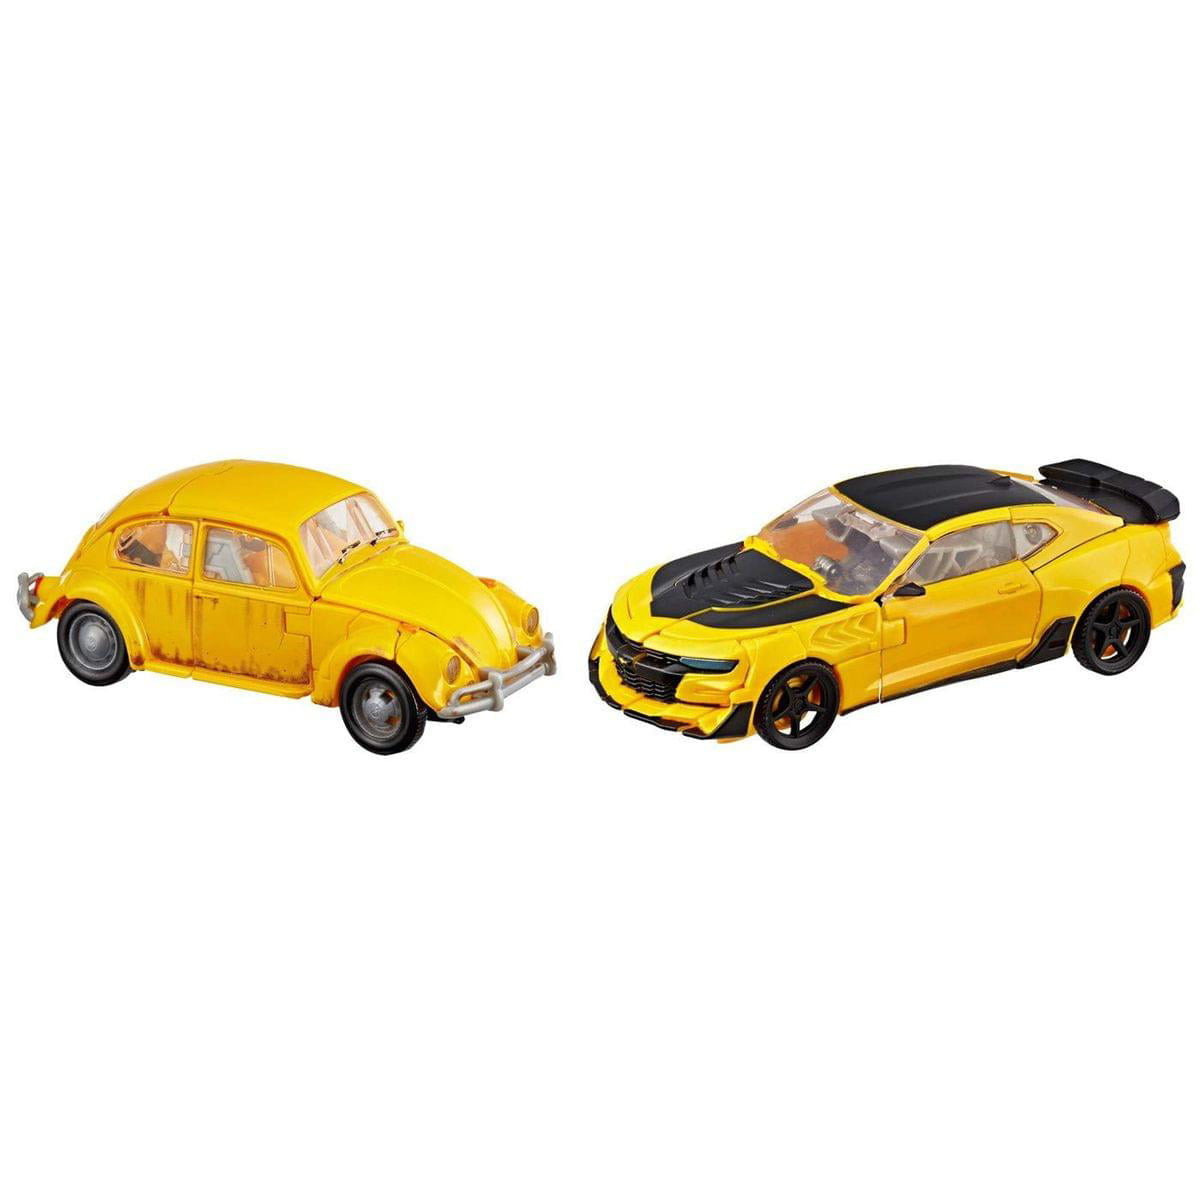 Transformers Studio Series 24 and 25 Deluxe Class Bumblebee 2-pack Including 1967 Volkswagen Beetle Bumblebee Movie Version and 2016 Chevrolet Camaro The Last Knight Movie Version